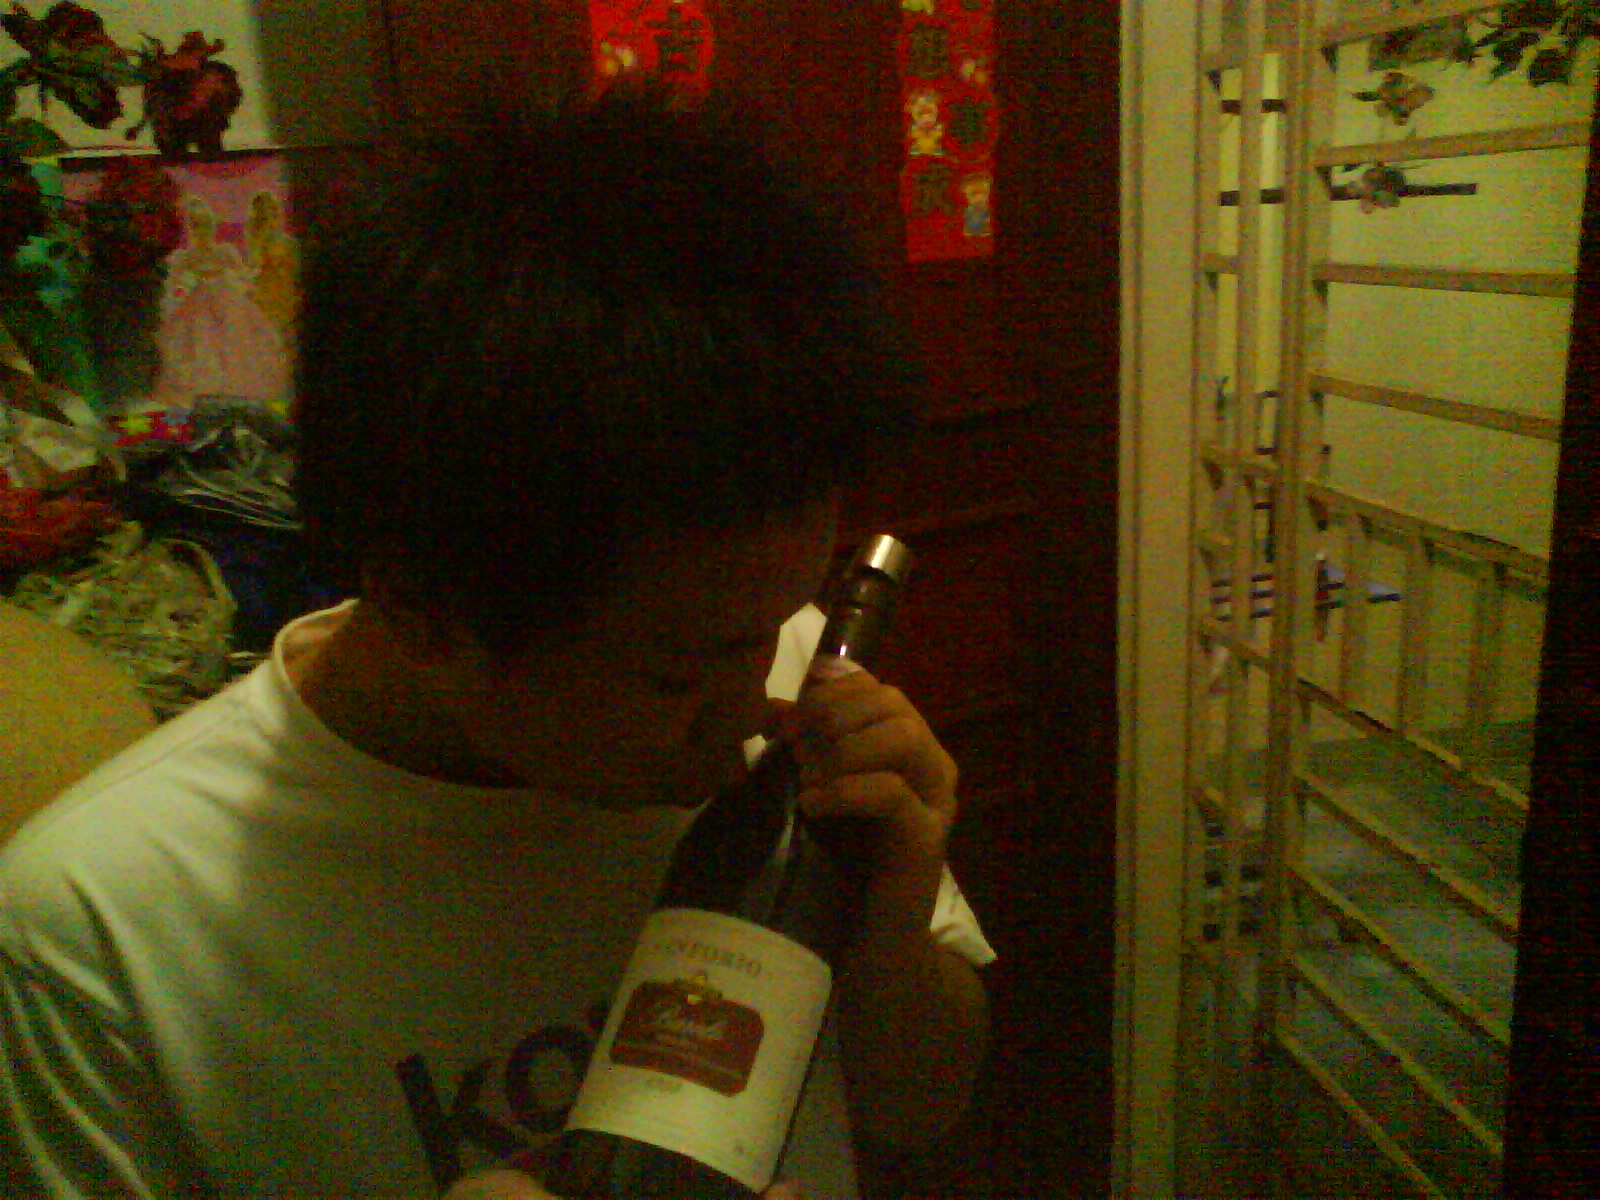 [Ming+Jin+with+the+red+wine.JPG]